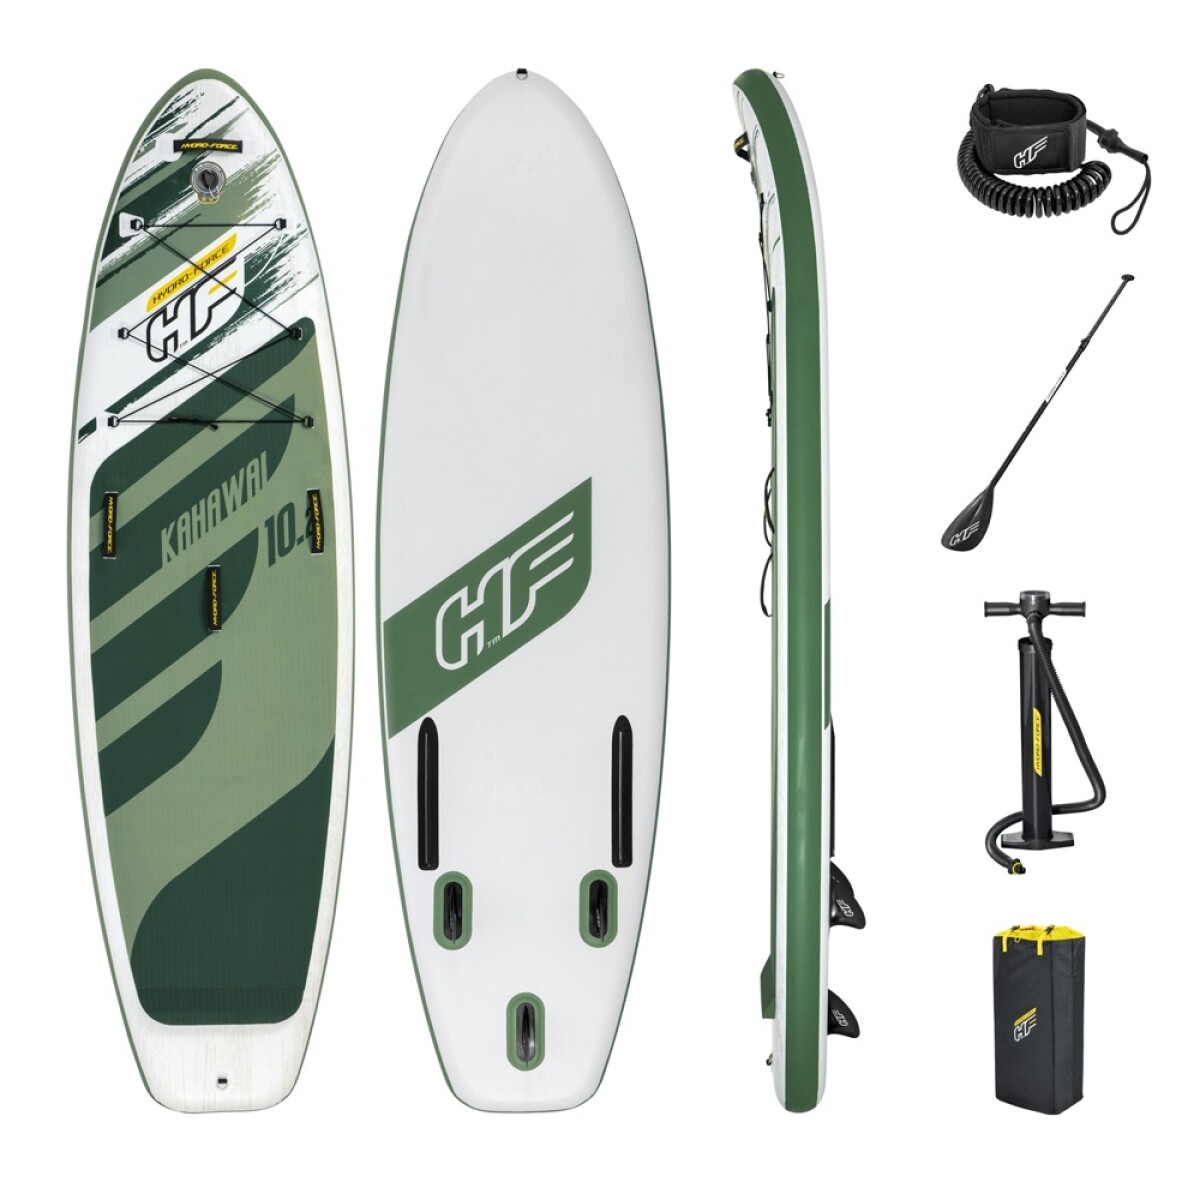 Tabla Stand Up Paddle Bestway Surf + Remo + Inflador + Bolso - 4086 